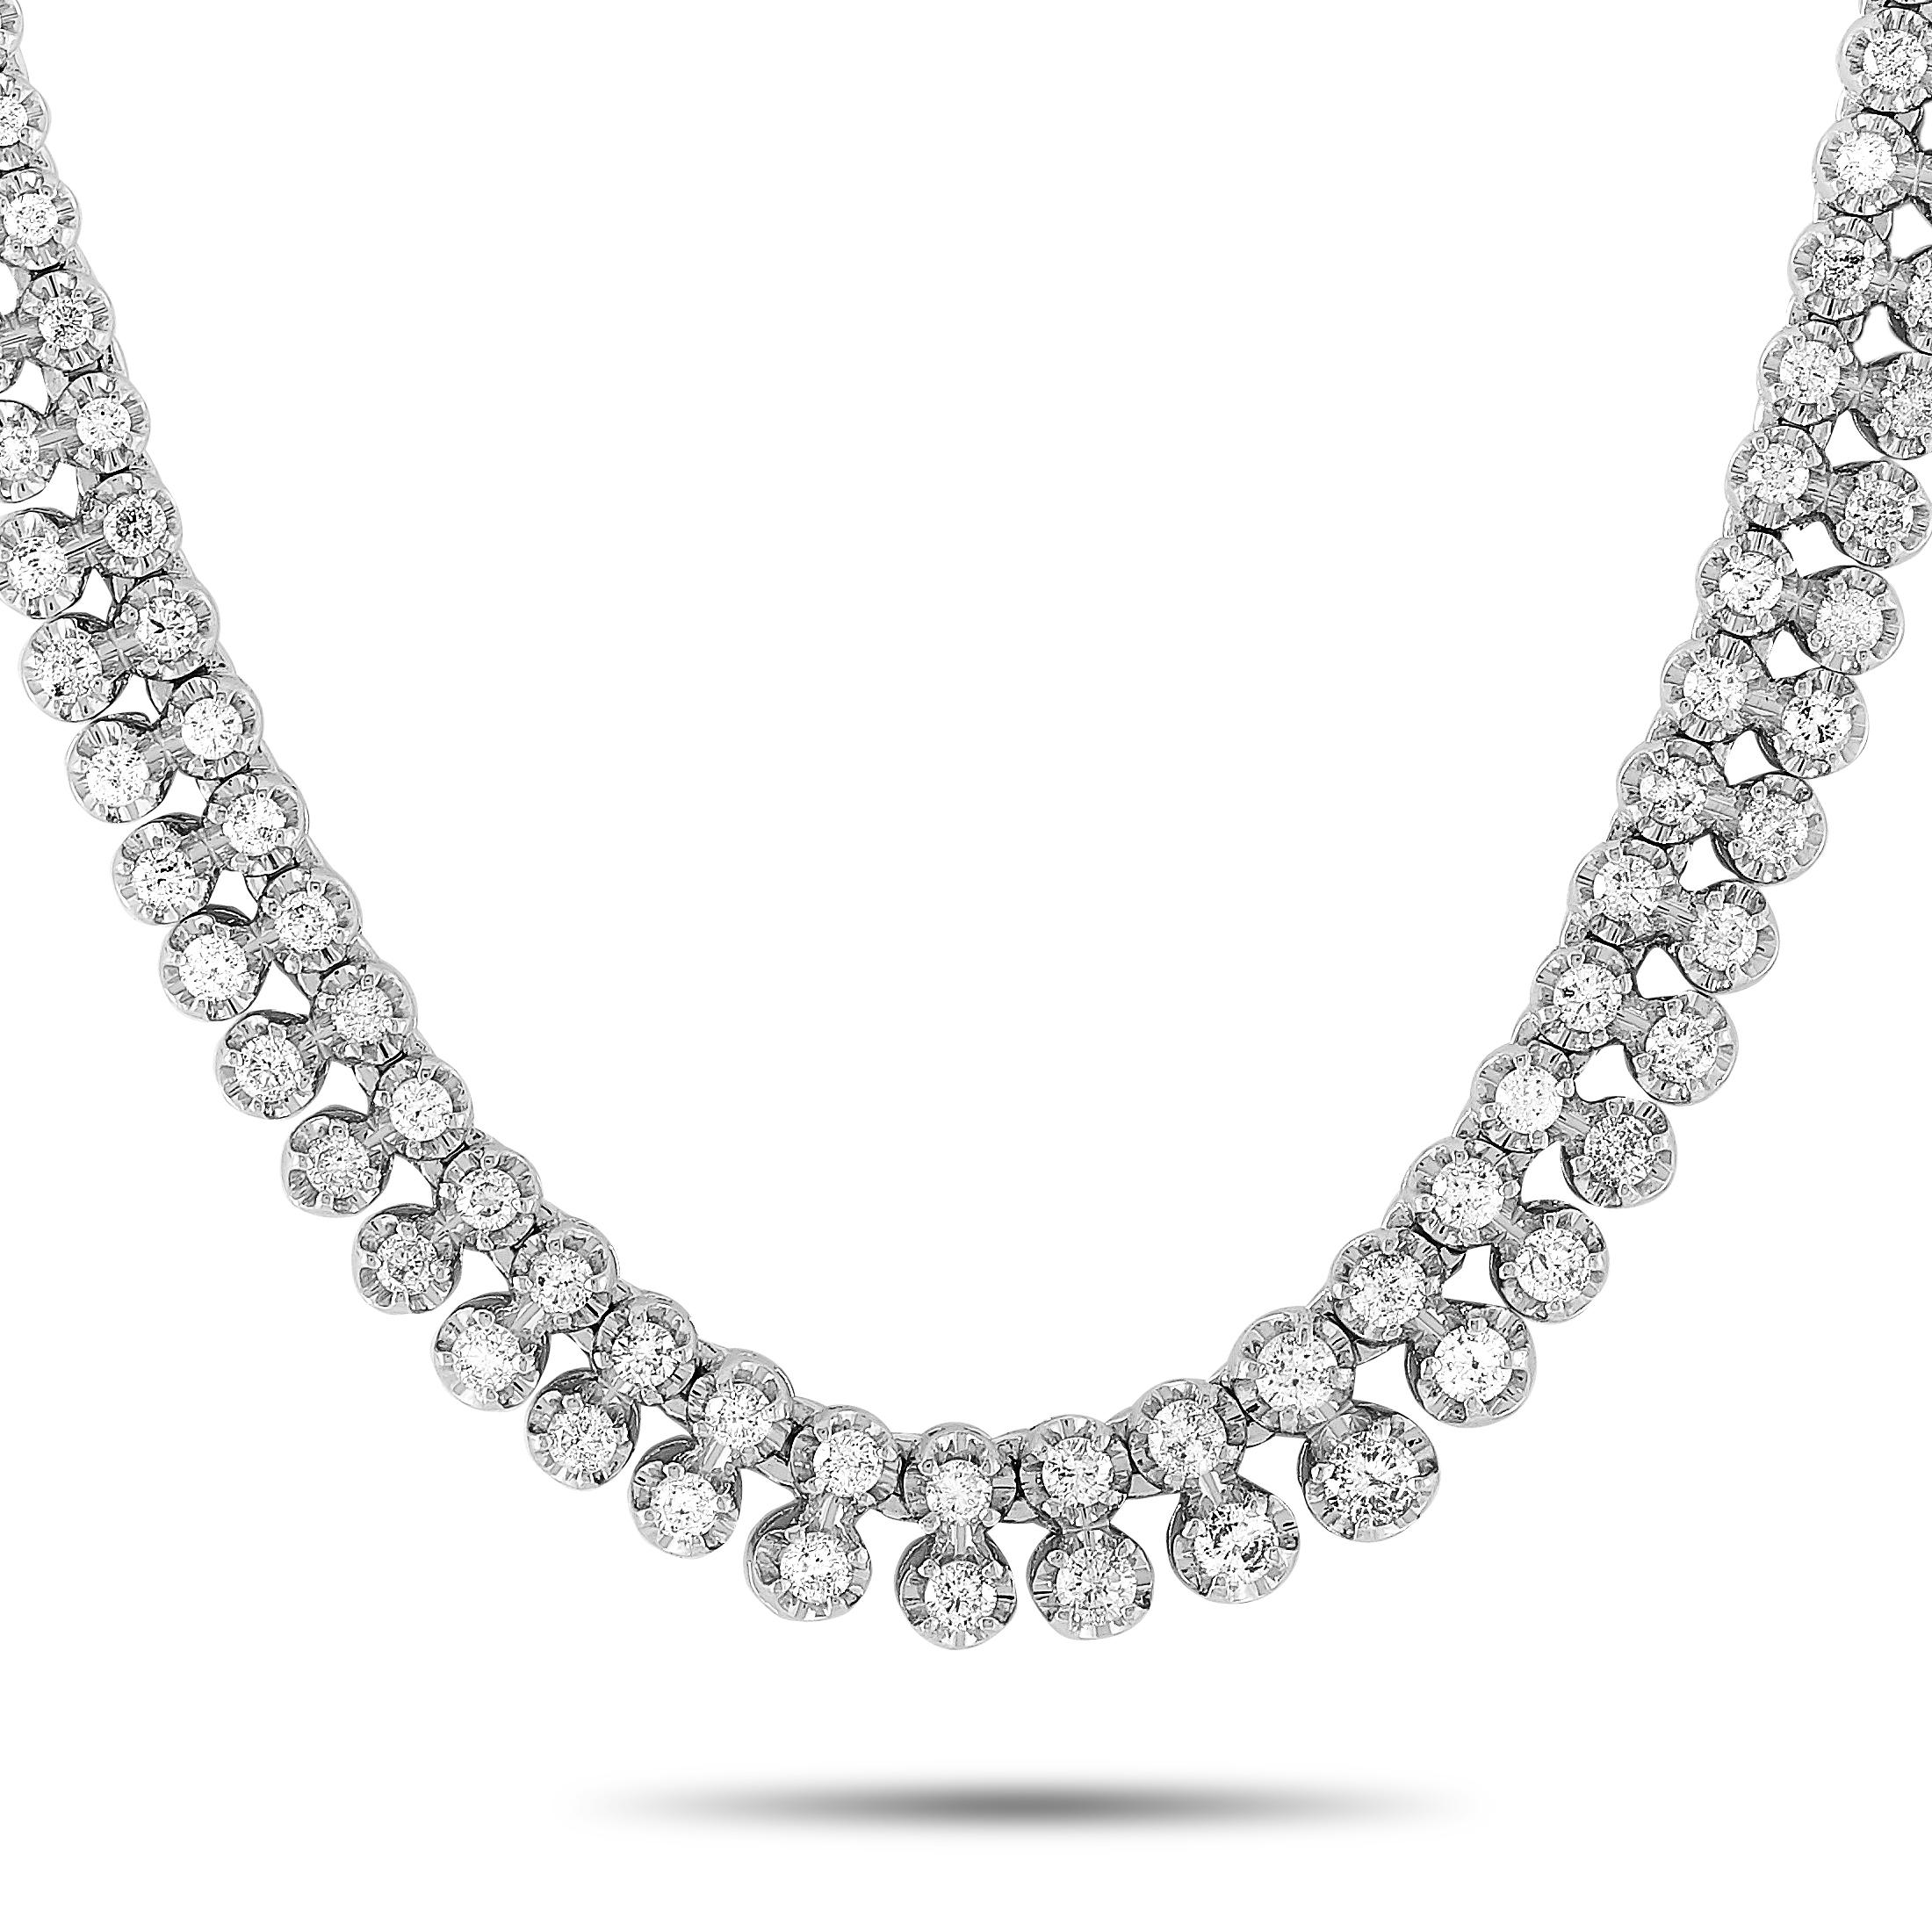 This LB Exclusive necklace is made of platinum and embellished with diamonds that amount to 5.08 carats. The necklace weighs 45.4 grams and measures 18” in length.
 
 Offered in estate condition, this jewelry piece includes a gift box.